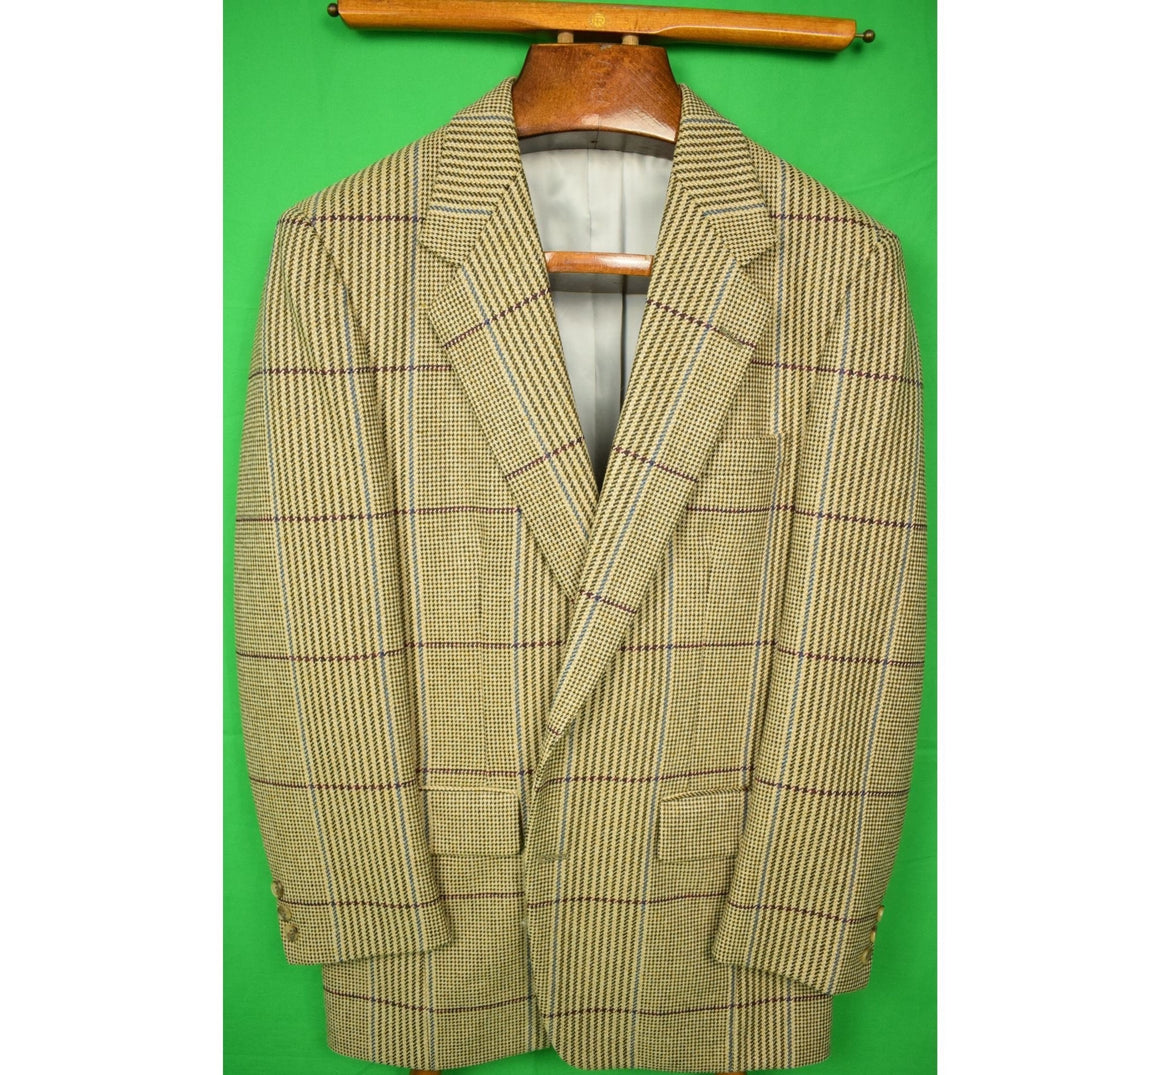 "The Andover Shop Scottish Cheviot Russell Plaid Tweed Sport Jacket" Sz 40R